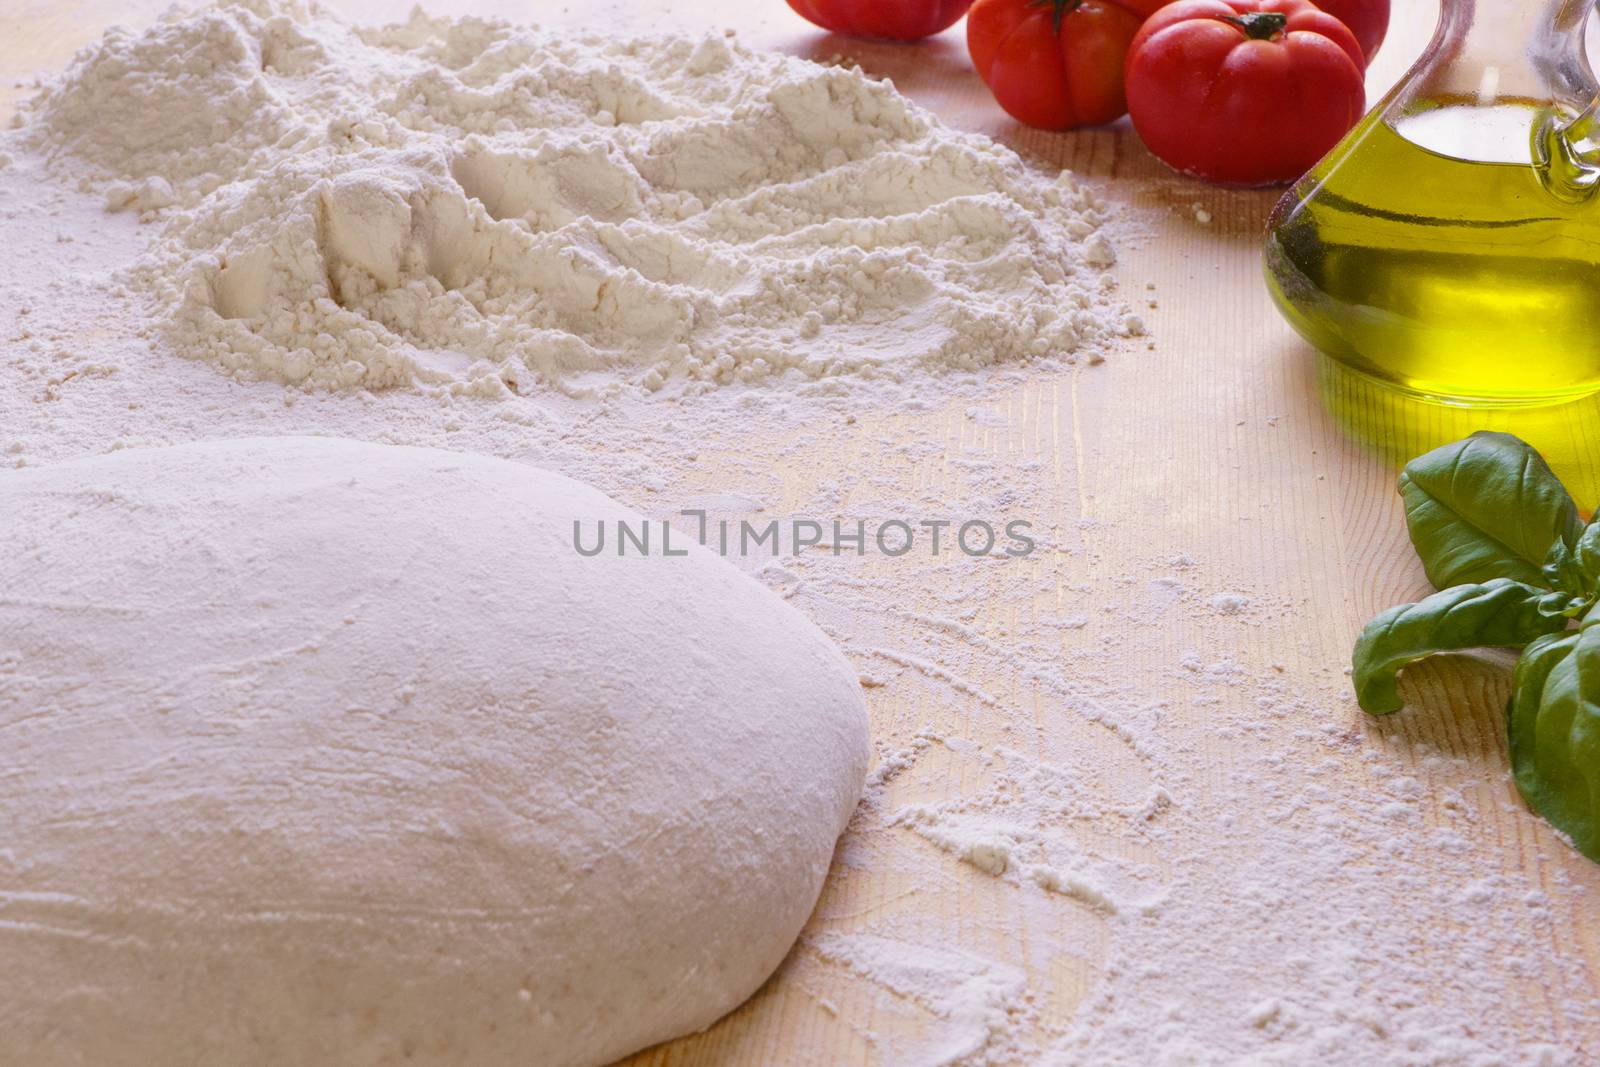 Macro close up of bread or pizza dough on wooden worktop and flour, extra virgin oil, tomatoes and basil in the background